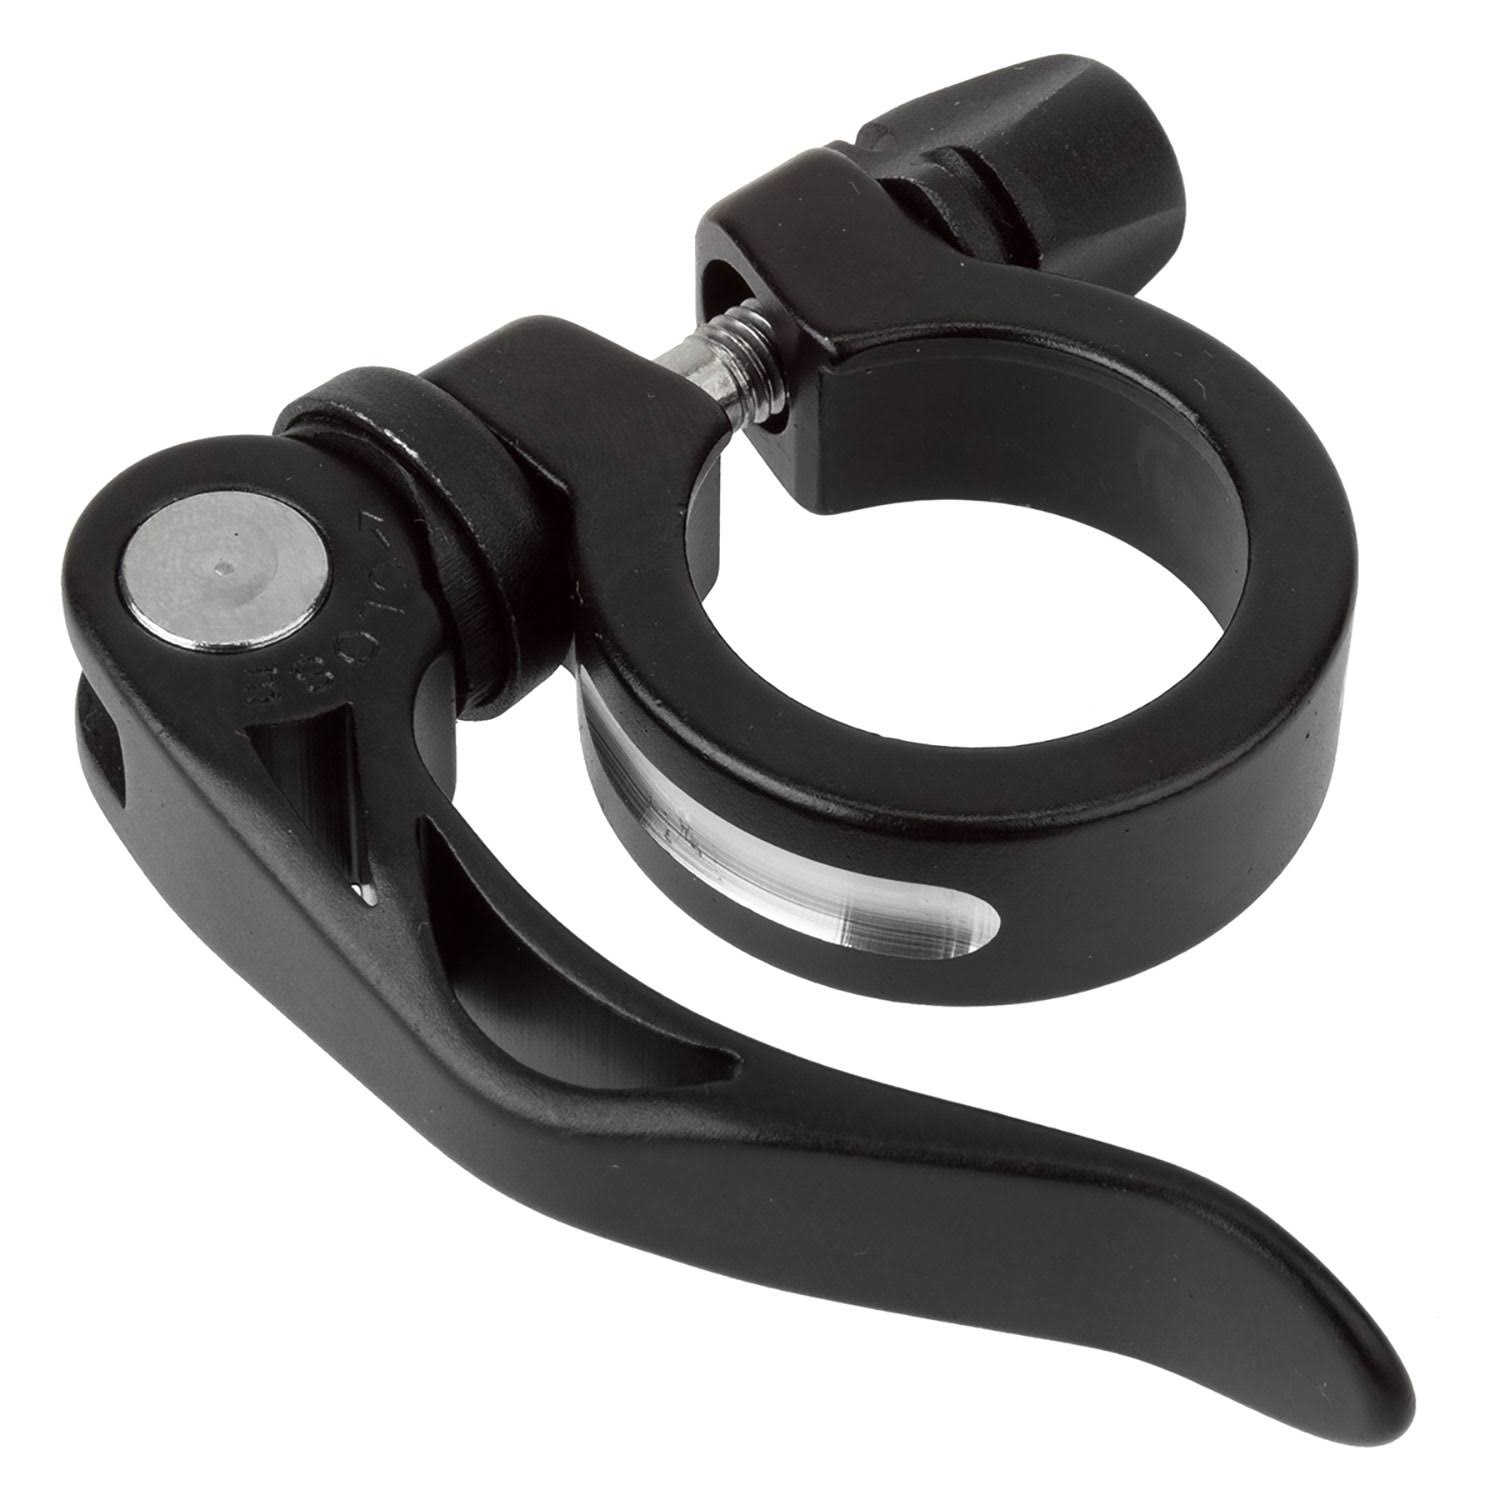 Sunlite Bicycle Quick Release Seat Clamp